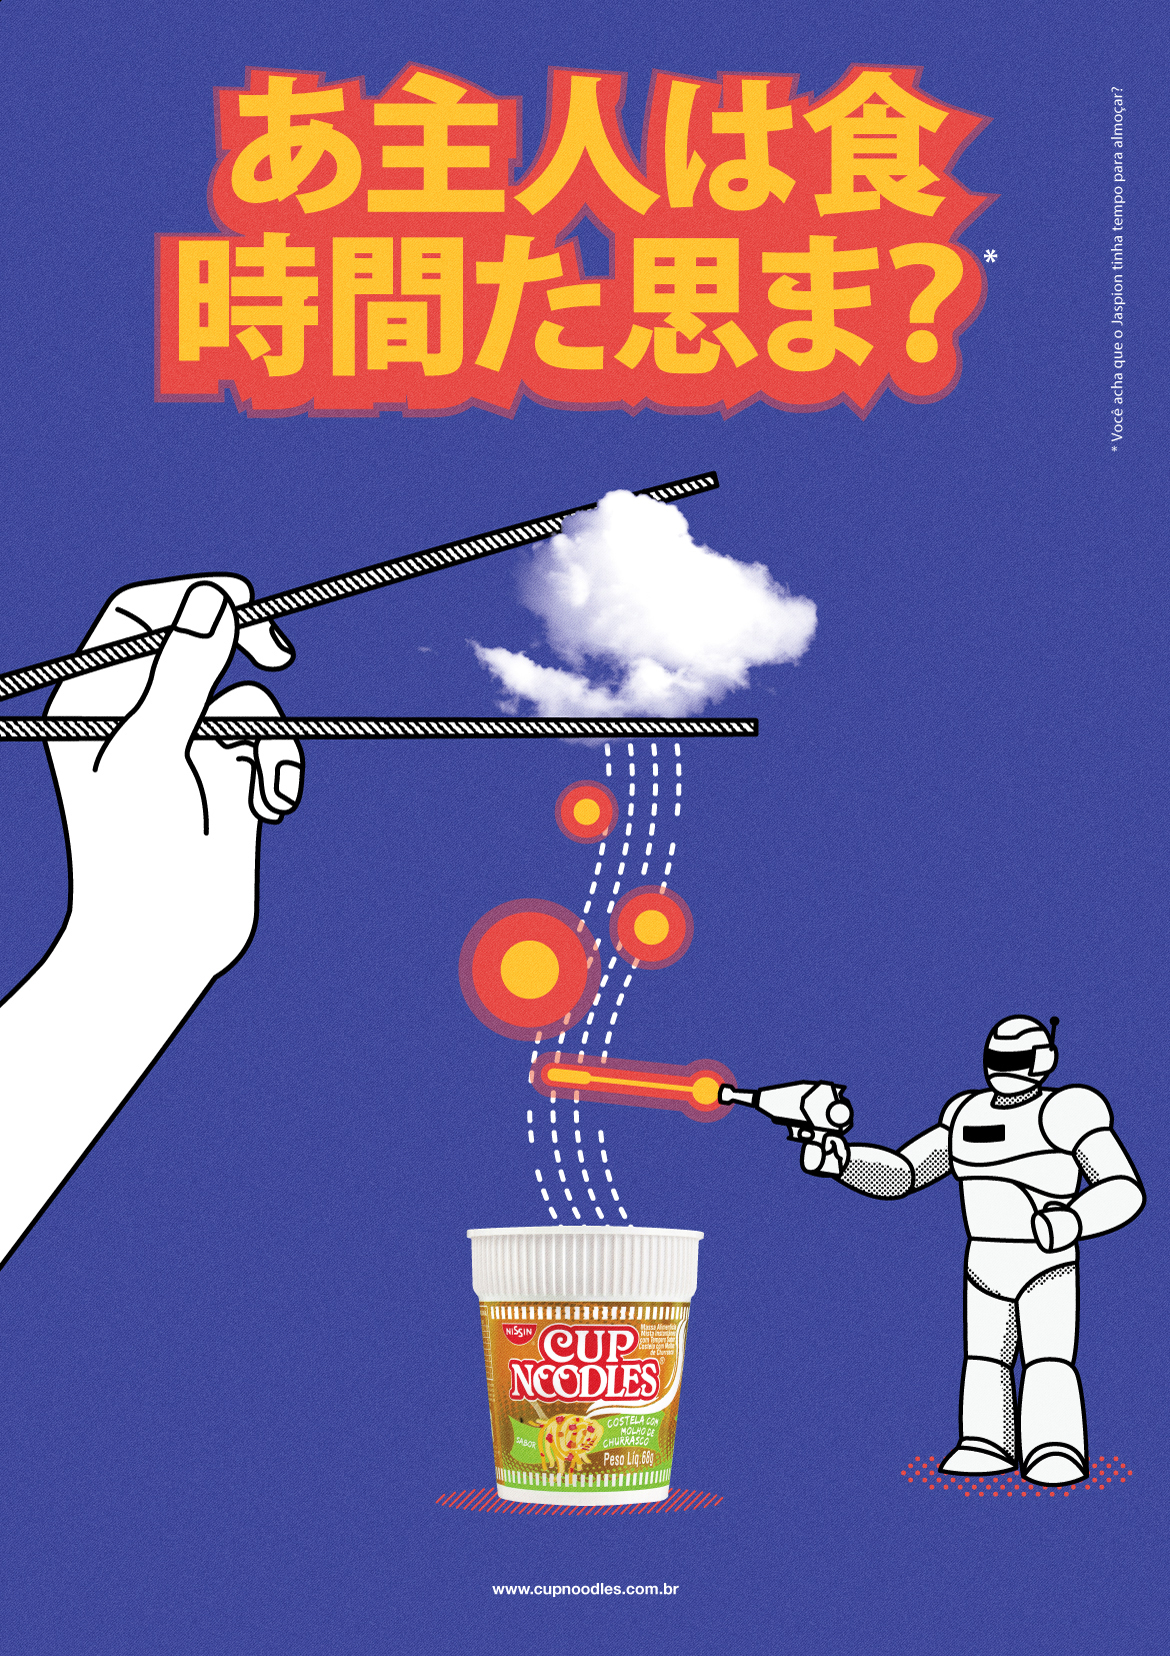 creative product CUP NOODLES copywrting